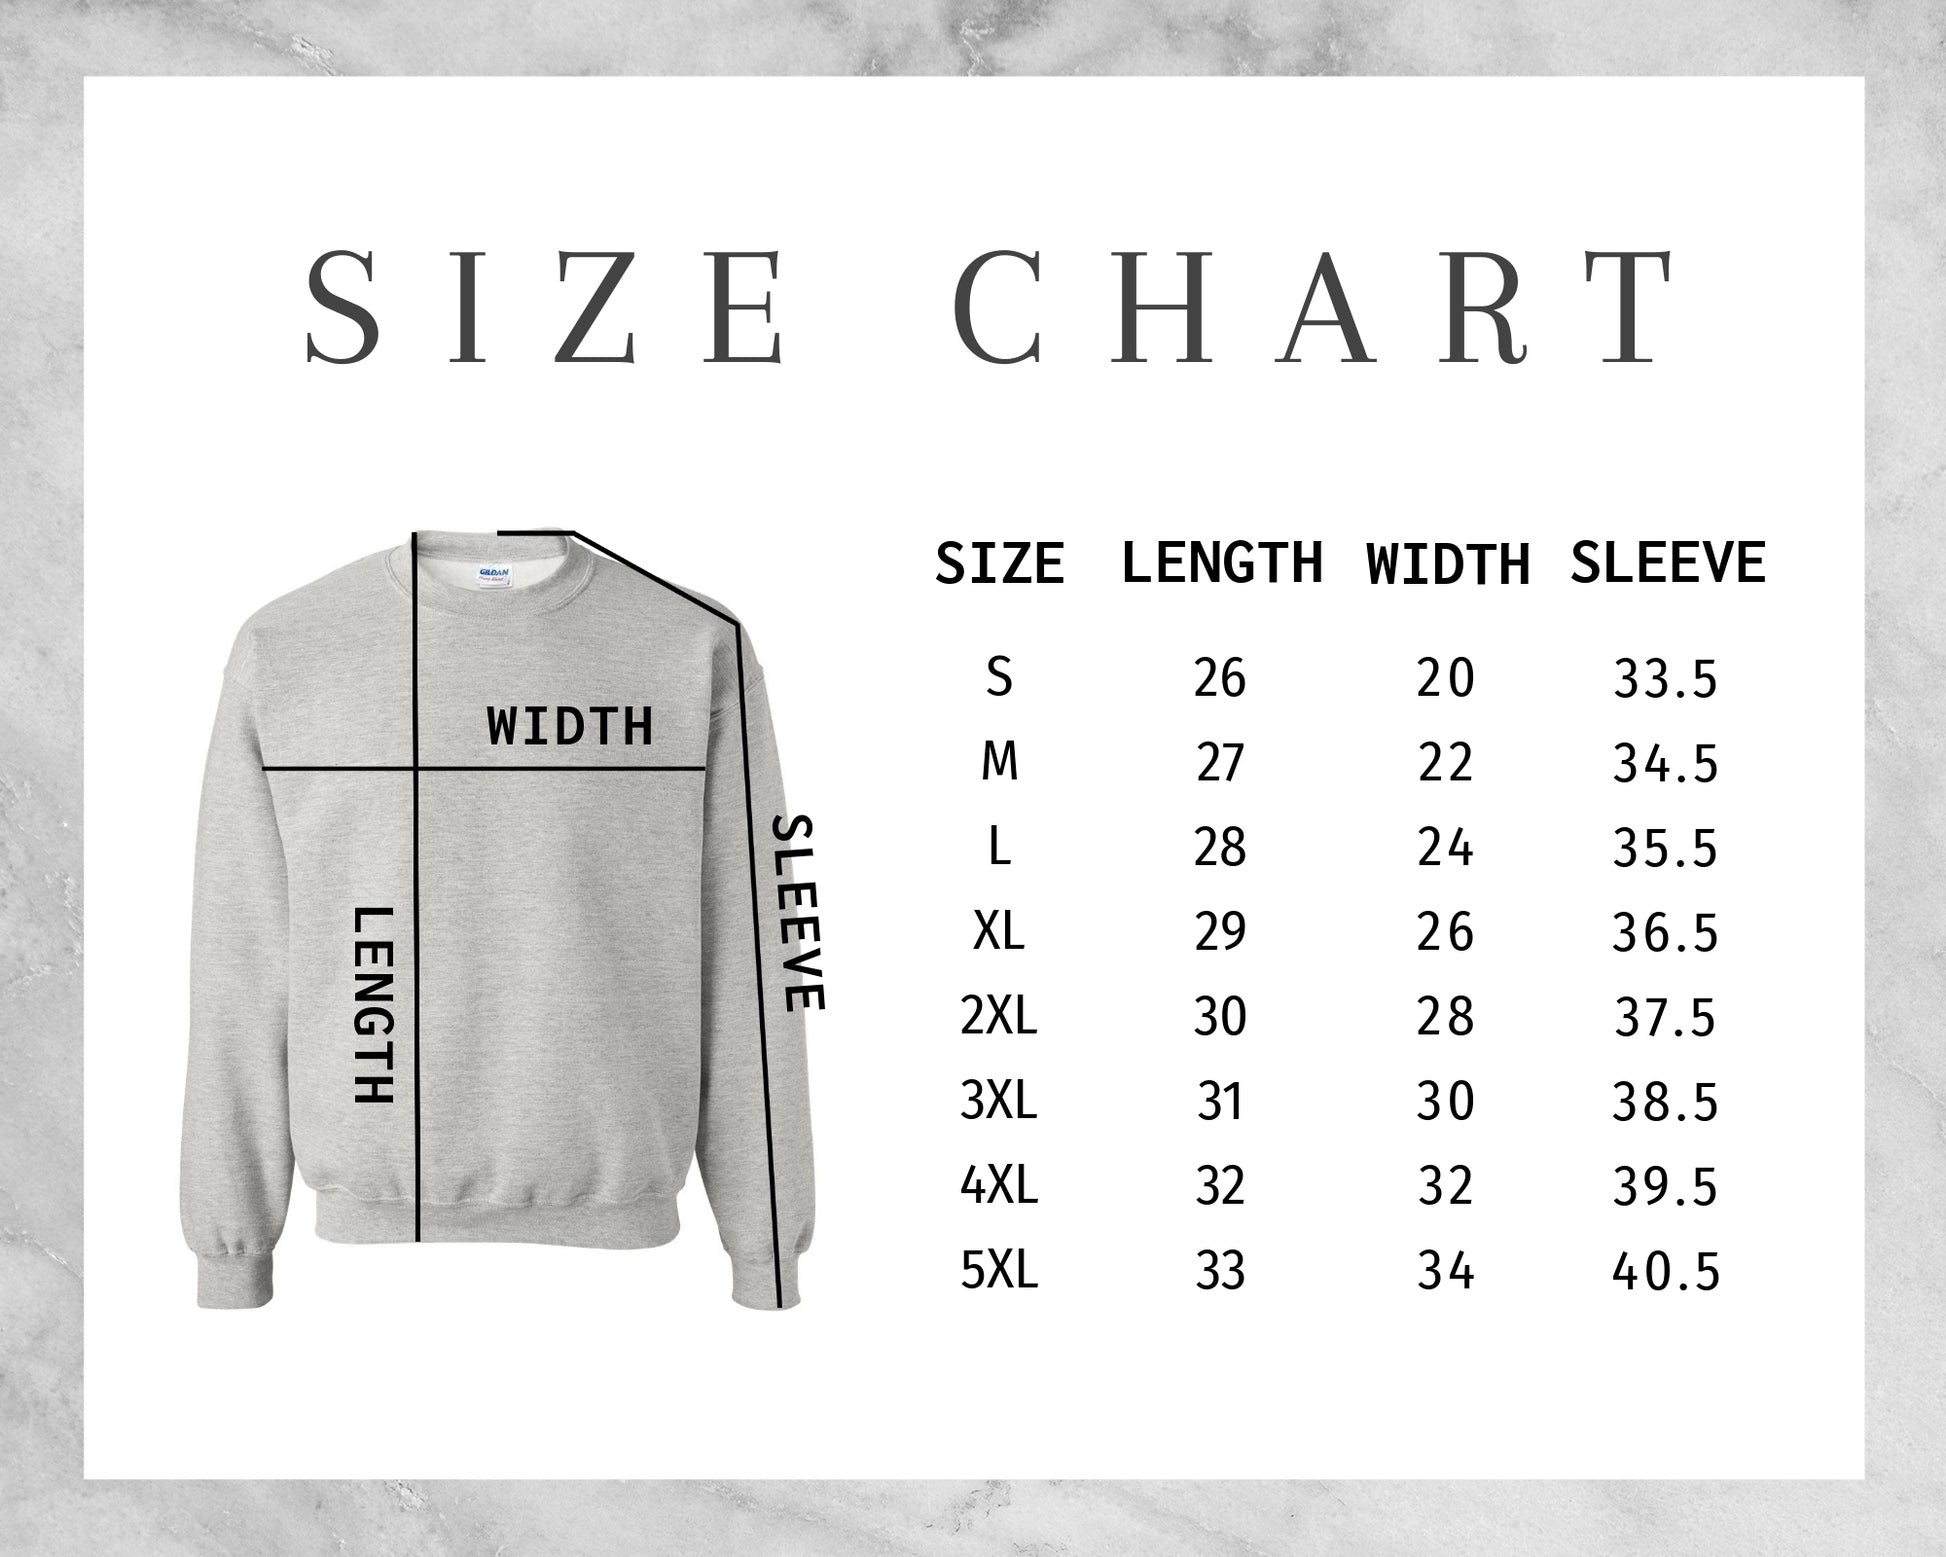 Size Charts - The Islamic Place